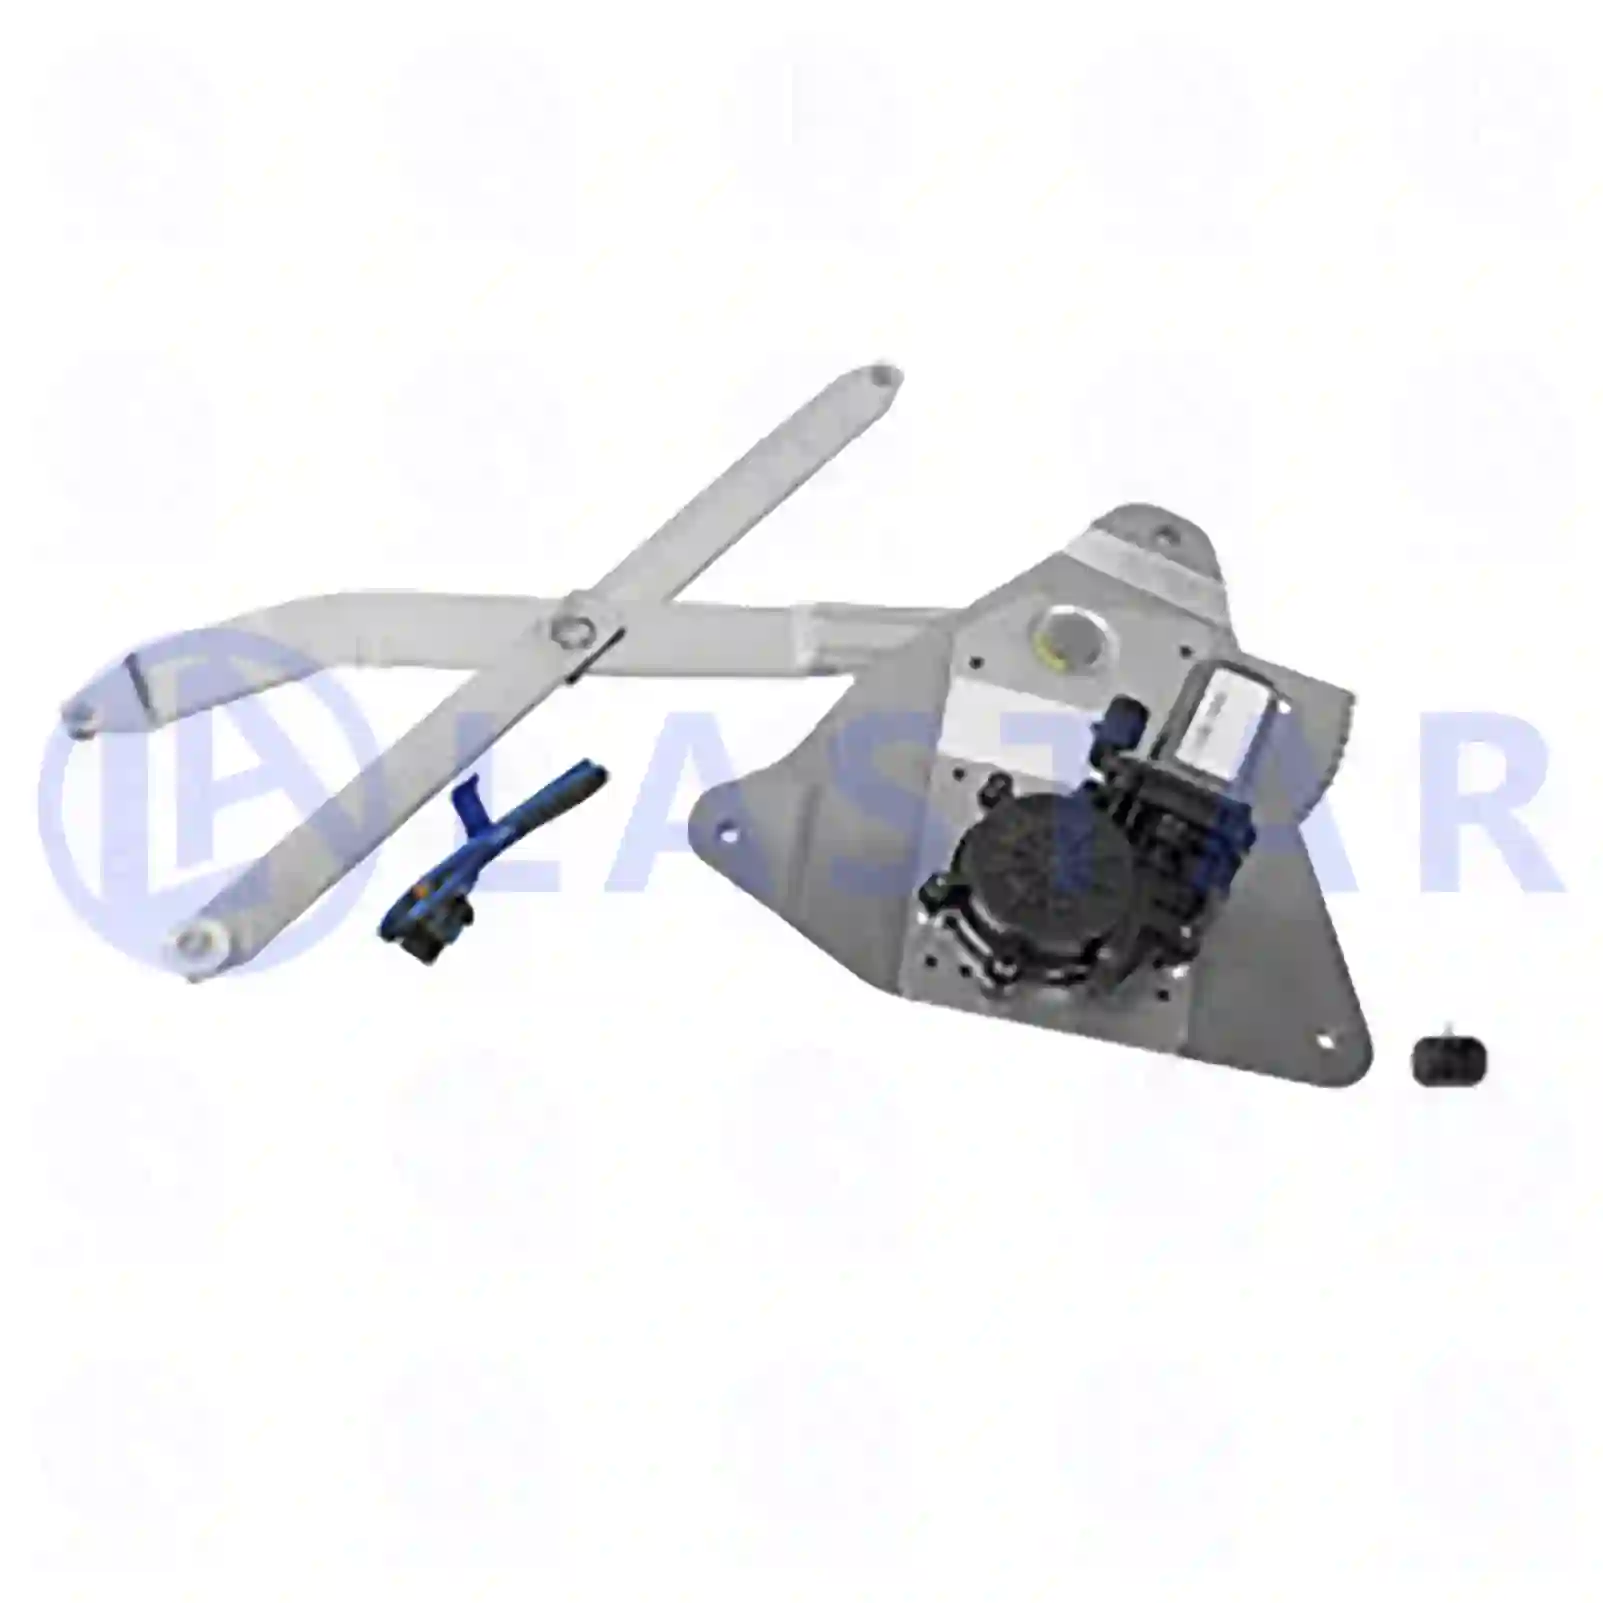 Window regulator, right, electrical, with motor, 77718113, 1406614, 1406616S, 376674, ZG61314-0008 ||  77718113 Lastar Spare Part | Truck Spare Parts, Auotomotive Spare Parts Window regulator, right, electrical, with motor, 77718113, 1406614, 1406616S, 376674, ZG61314-0008 ||  77718113 Lastar Spare Part | Truck Spare Parts, Auotomotive Spare Parts